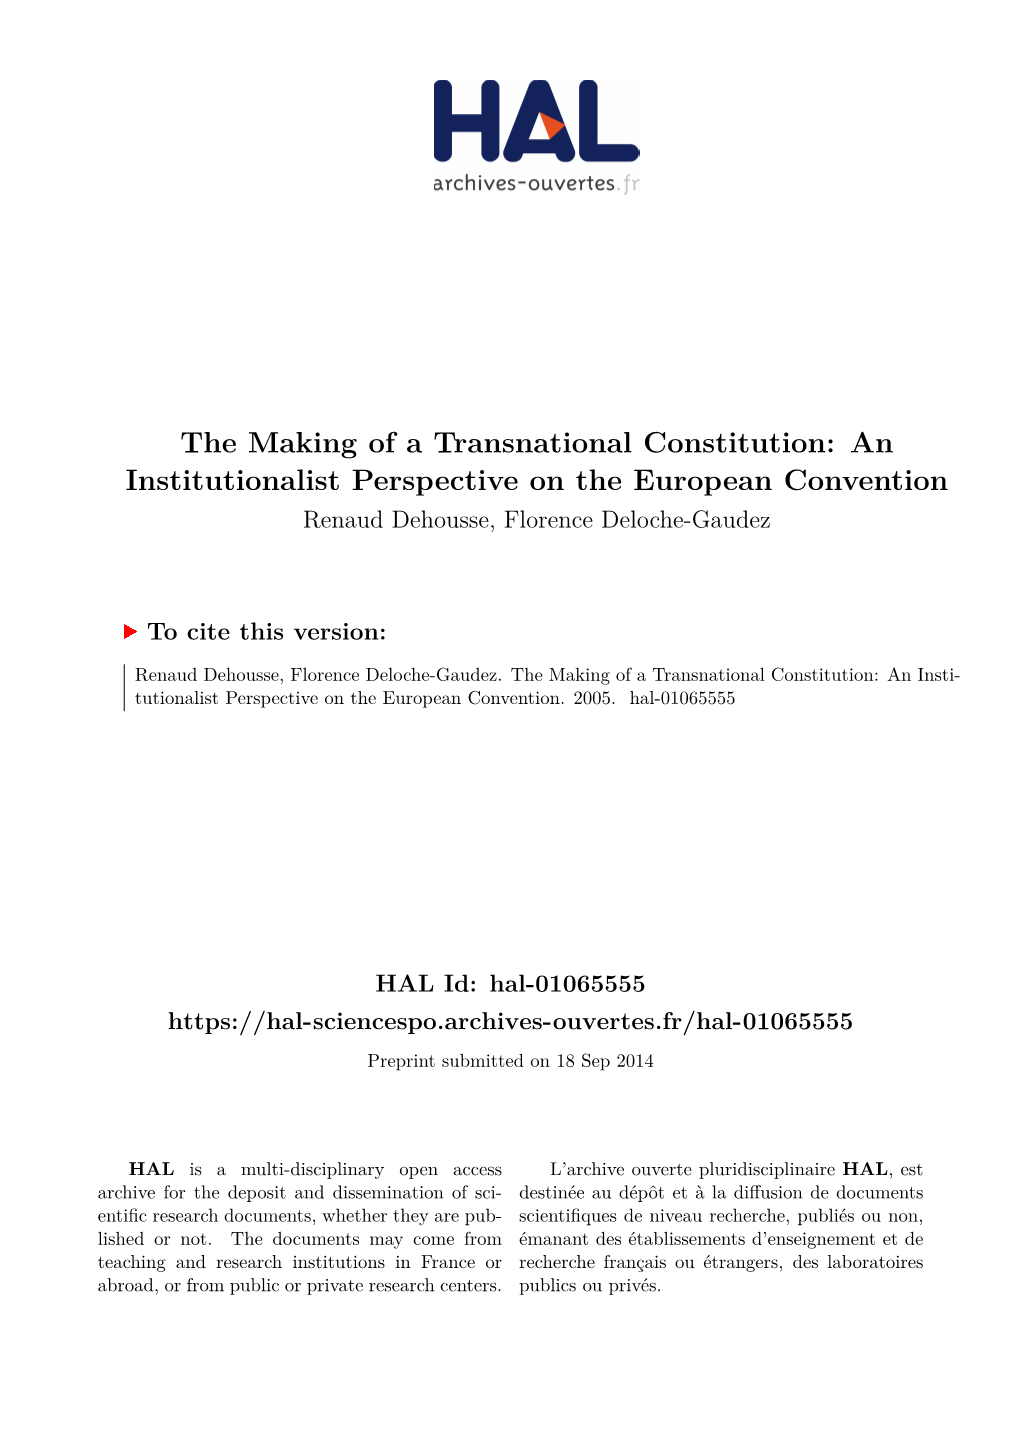 The Making of a Transnational Constitution: an Institutionalist Perspective on the European Convention Renaud Dehousse, Florence Deloche-Gaudez